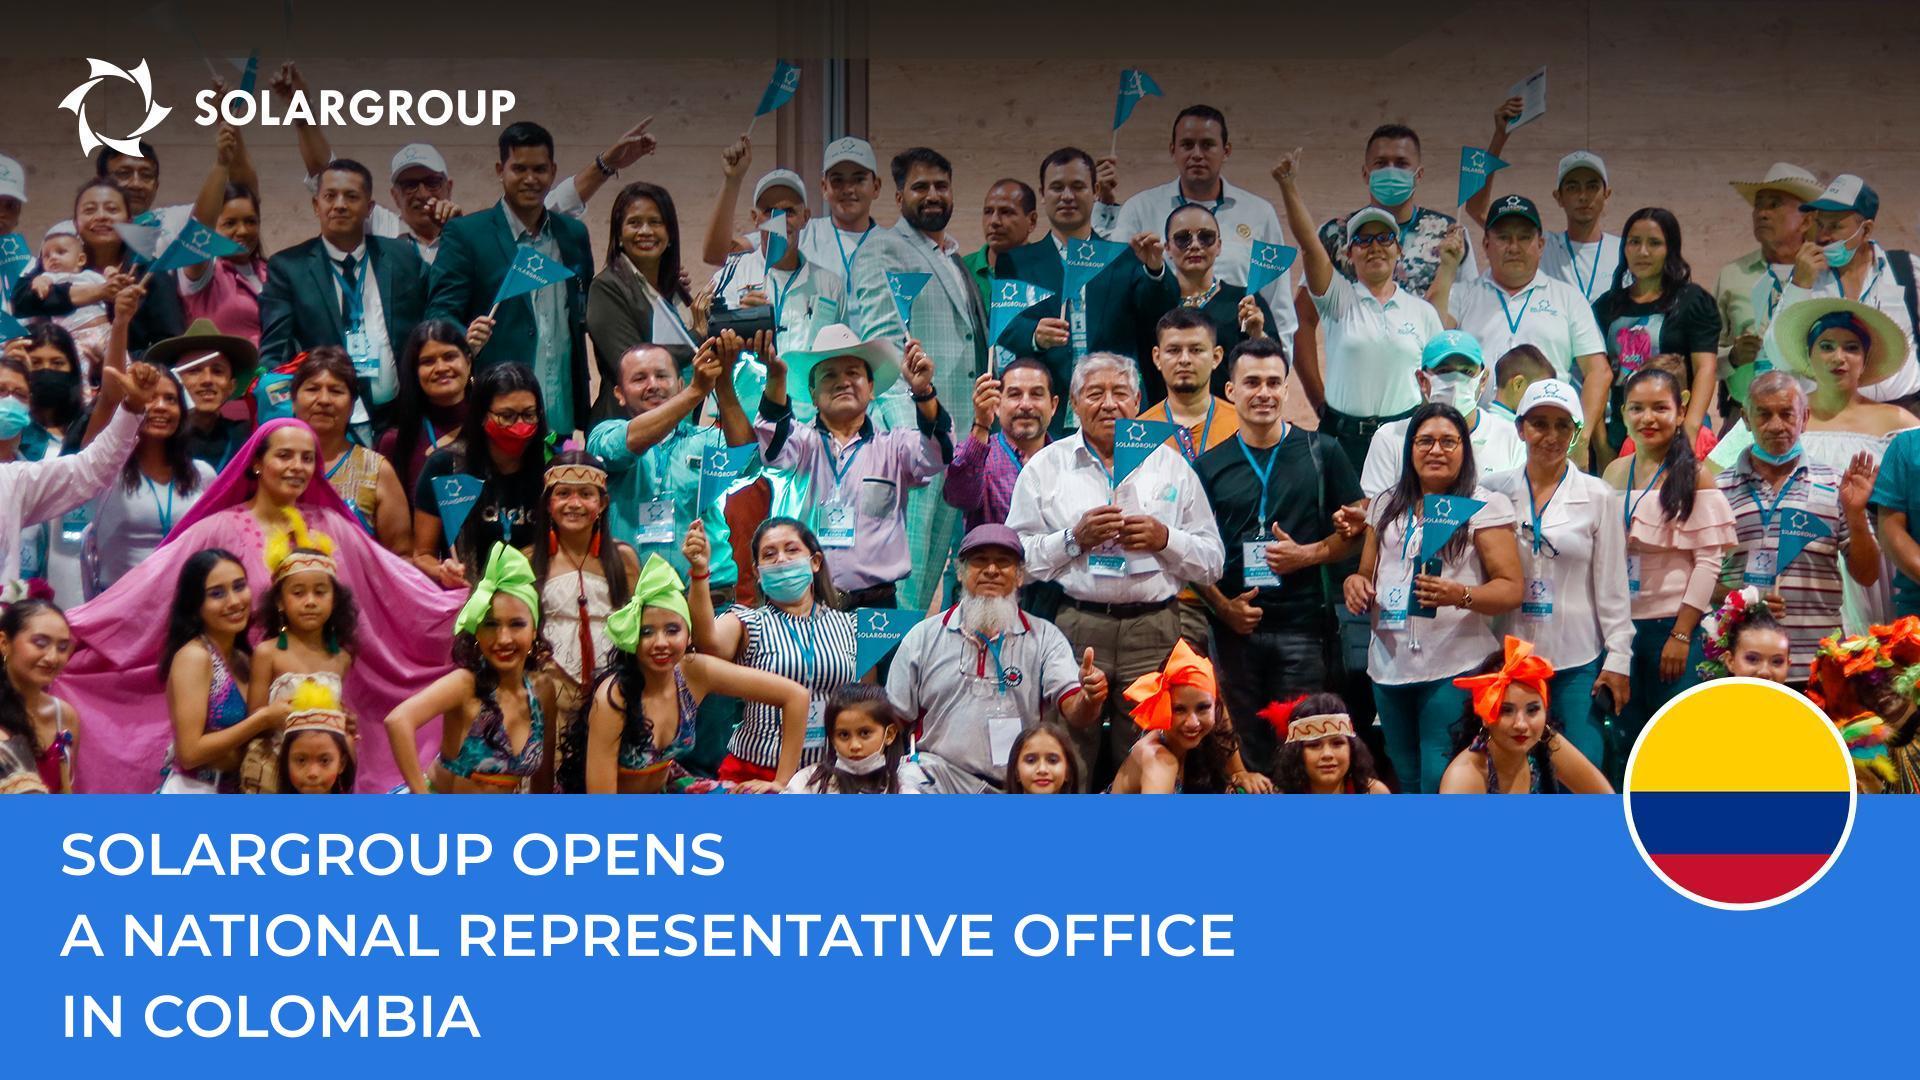 SOLARGROUP opens a national representative office in Colombia